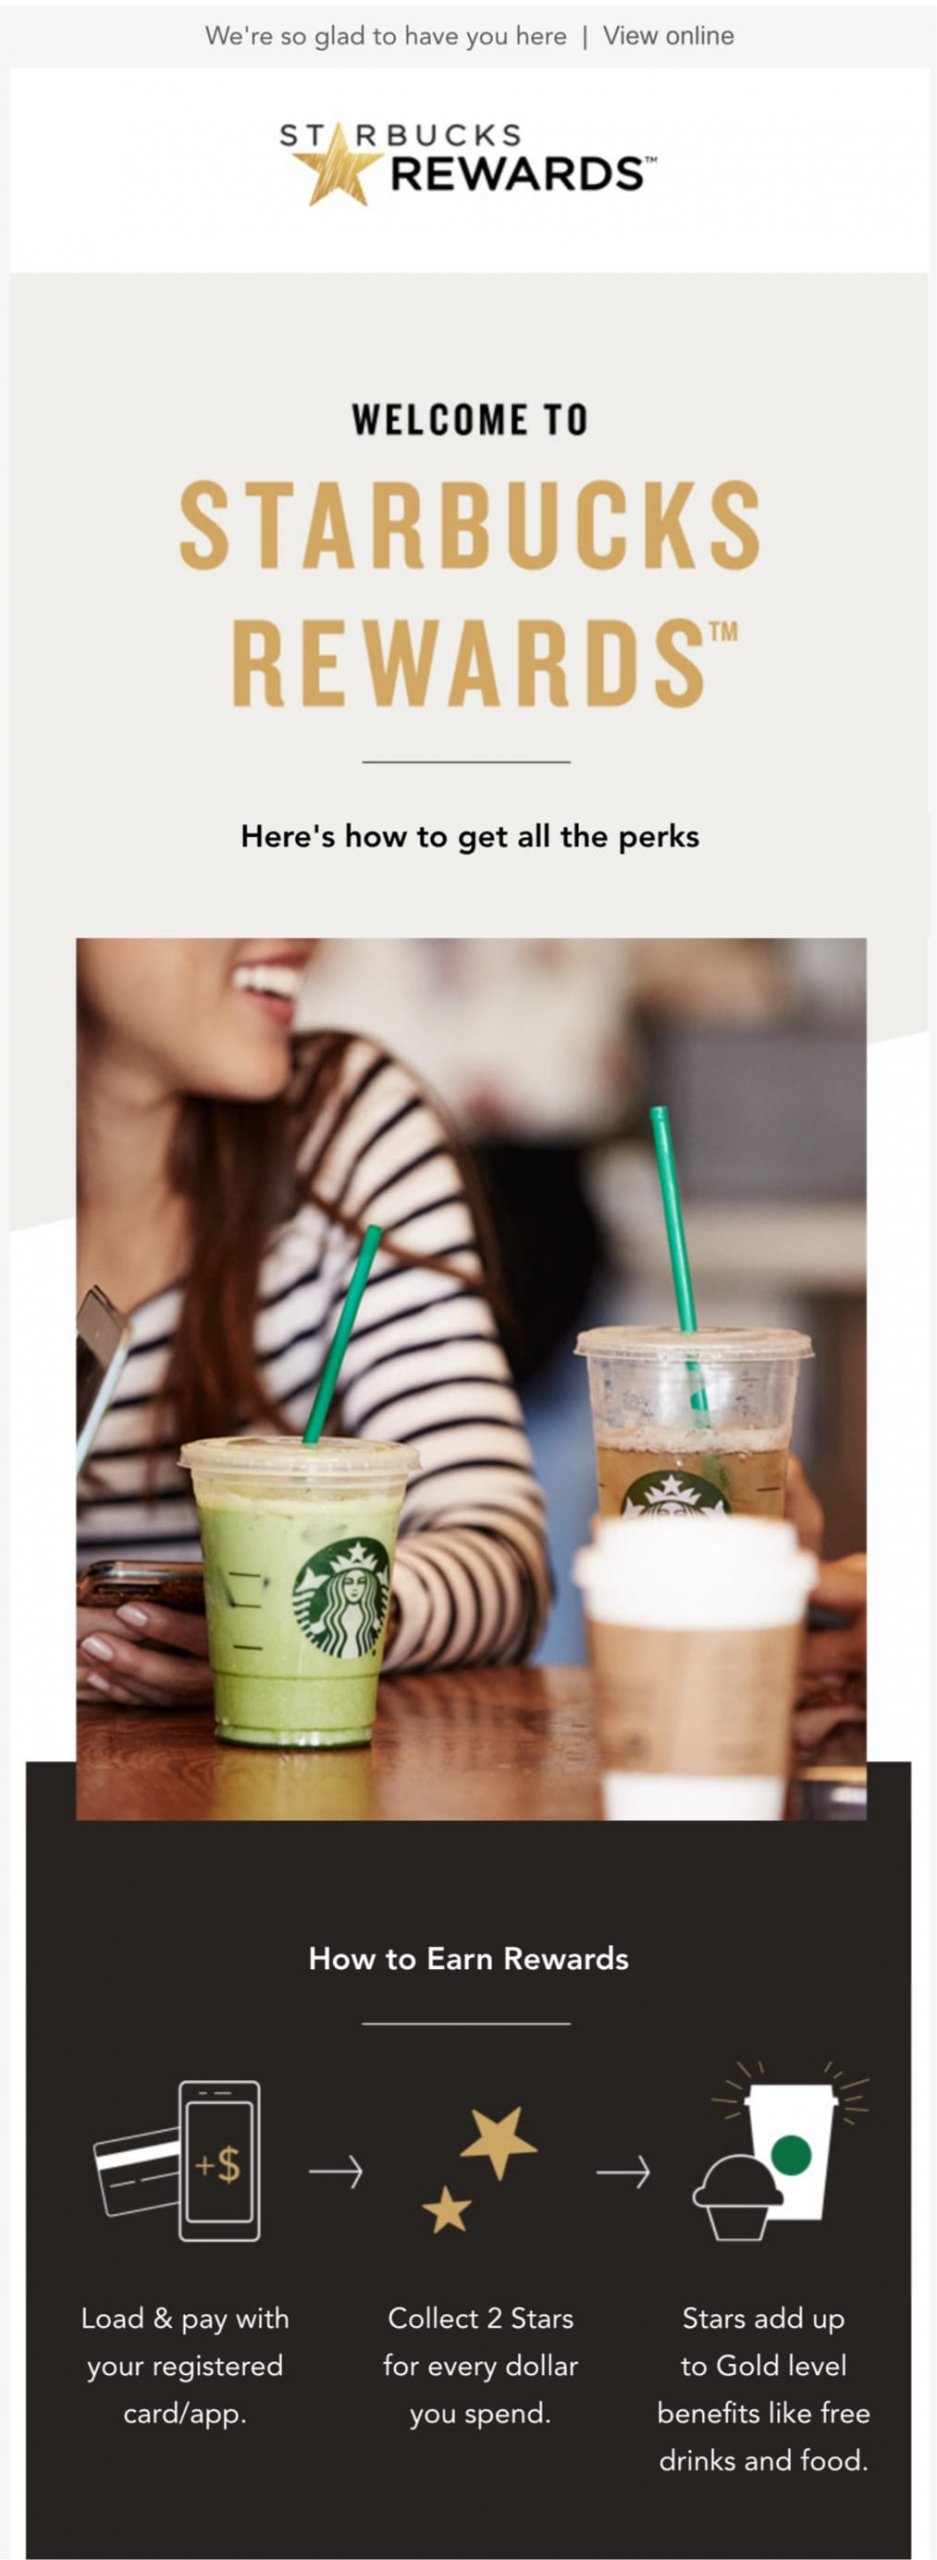  welcome email example- Starbucks